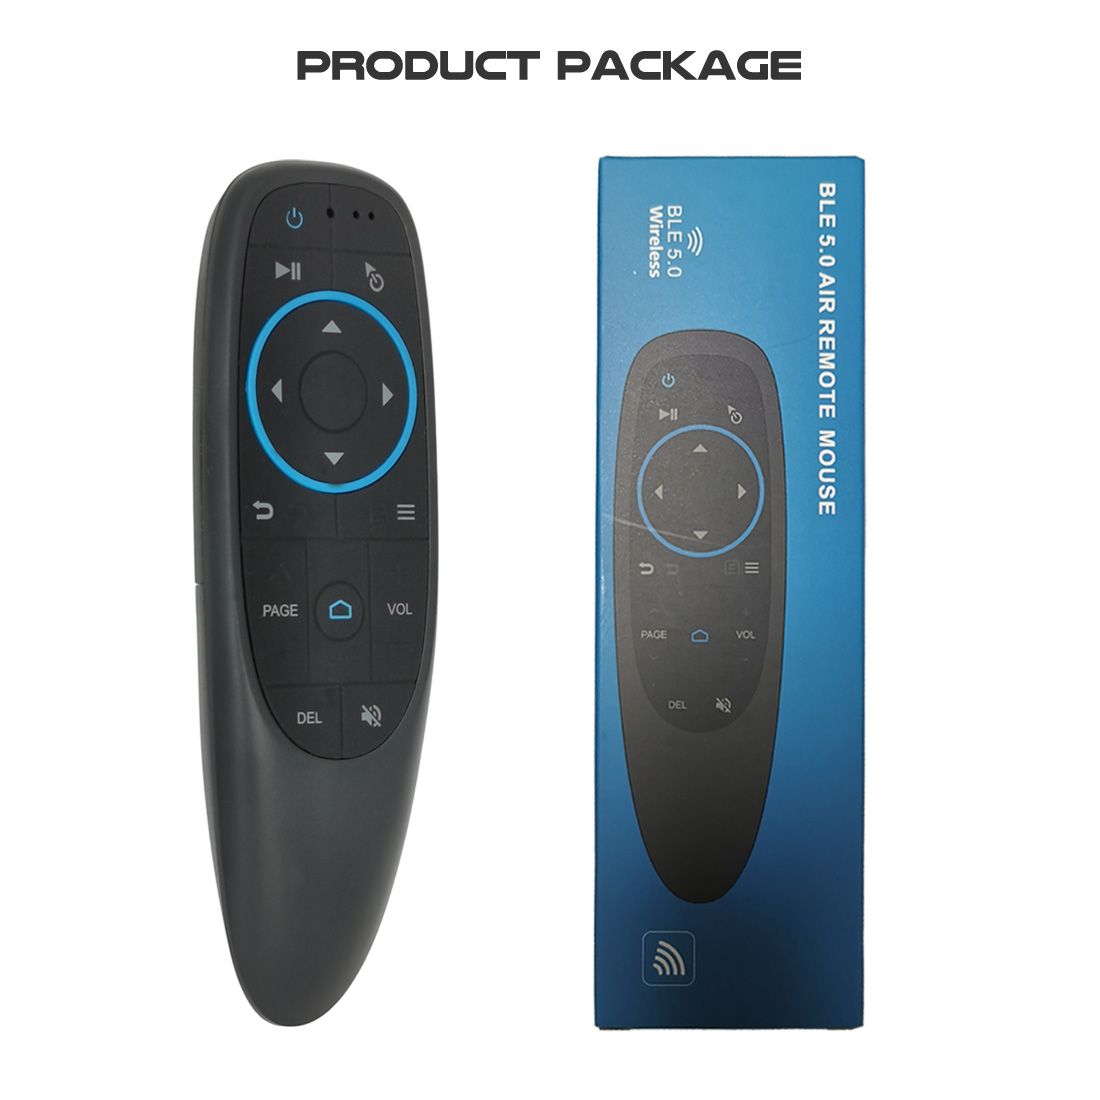 G10BTS-Air-Mouse-IR-Learning-Gyroscope-Bluetooth-50-Wireless-Infrared-Remote-Control-for-Android-Tv--1733704